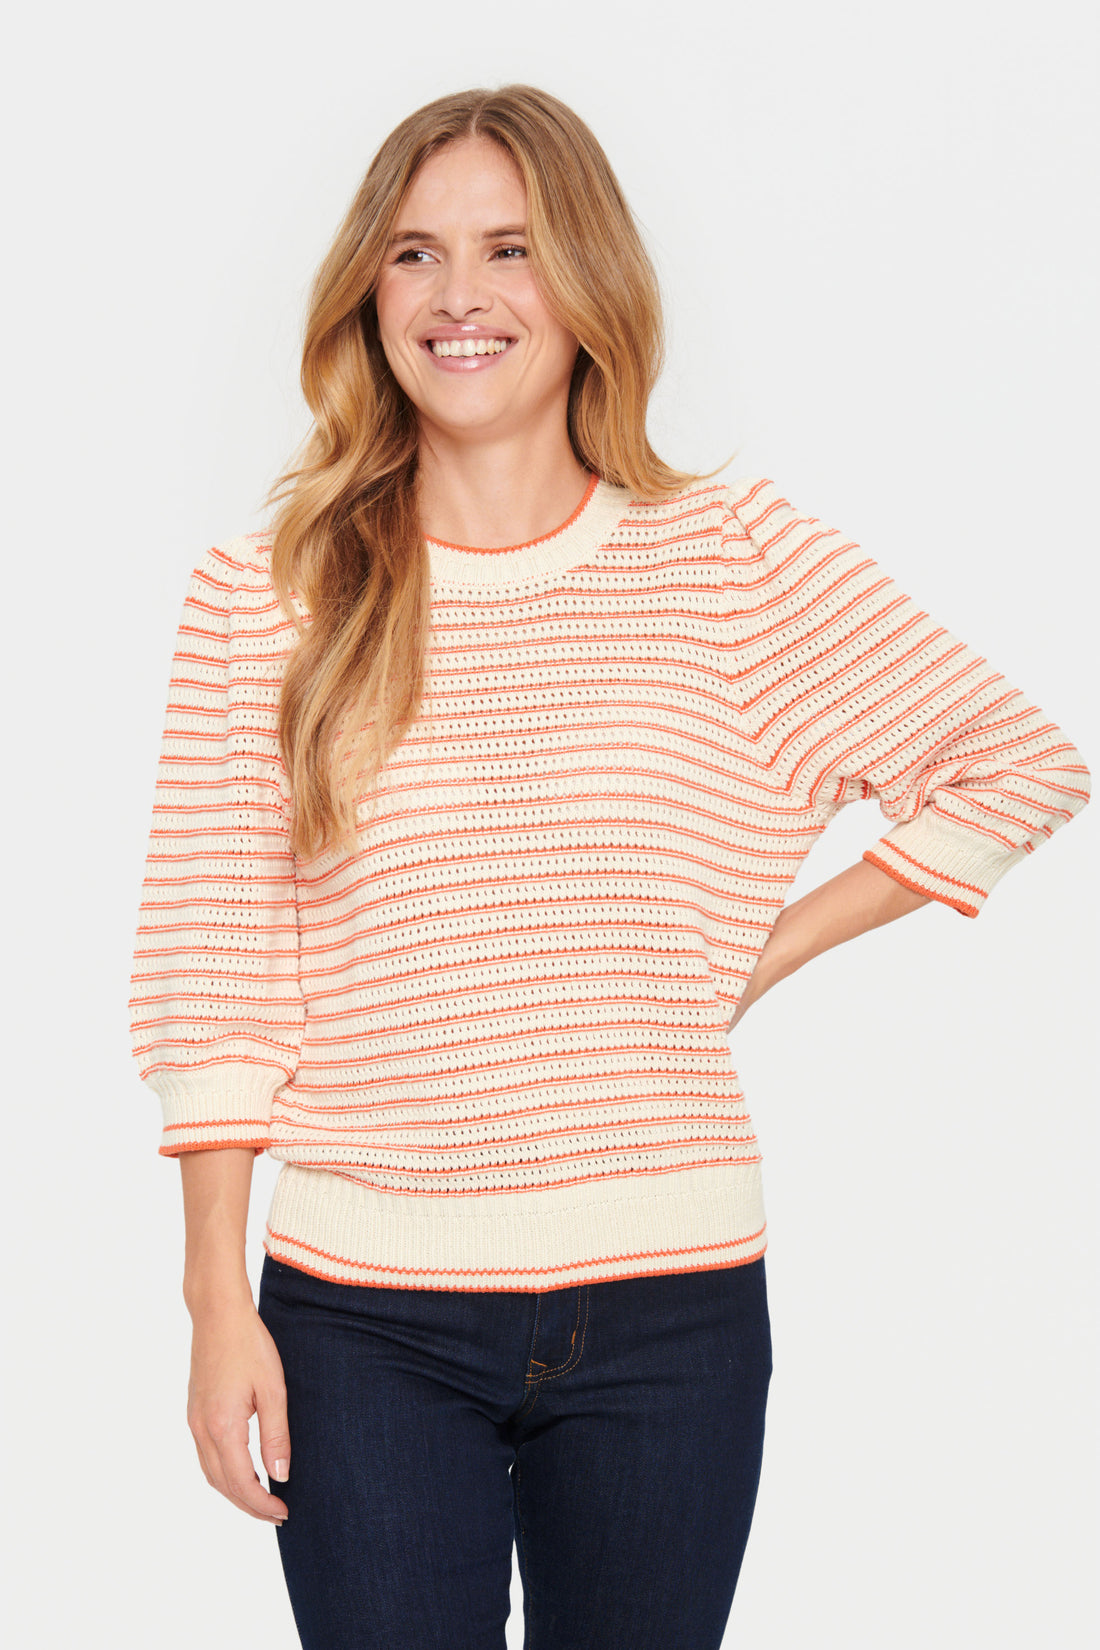 Saint Tropez Delice Pullover Knit in Tigerlily